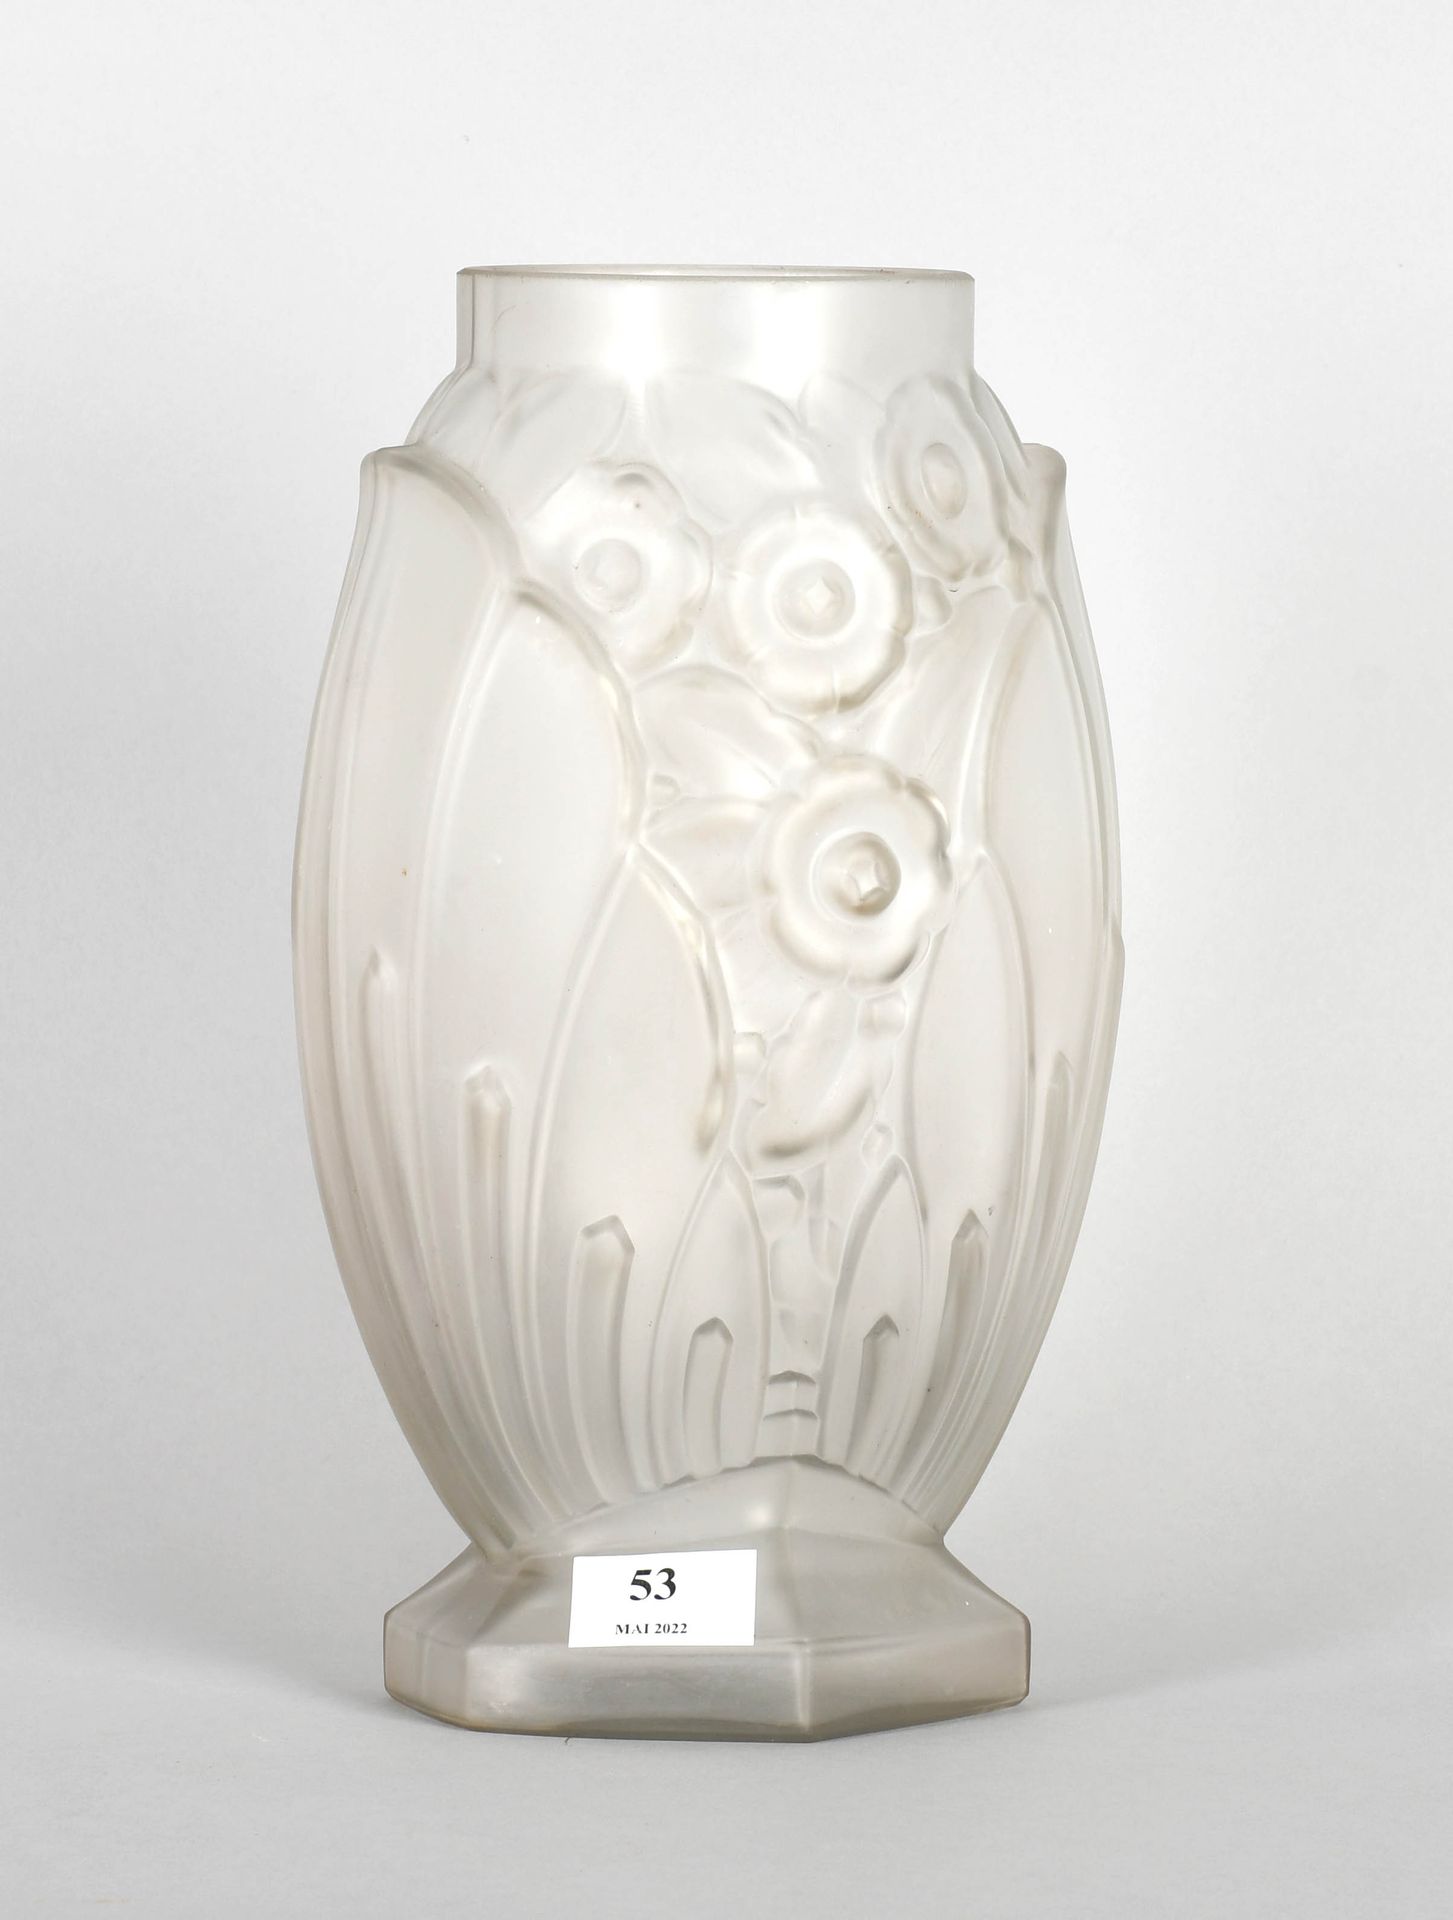 Null Muller Brothers Lunéville

Art deco molded glass vase with floral and folia&hellip;